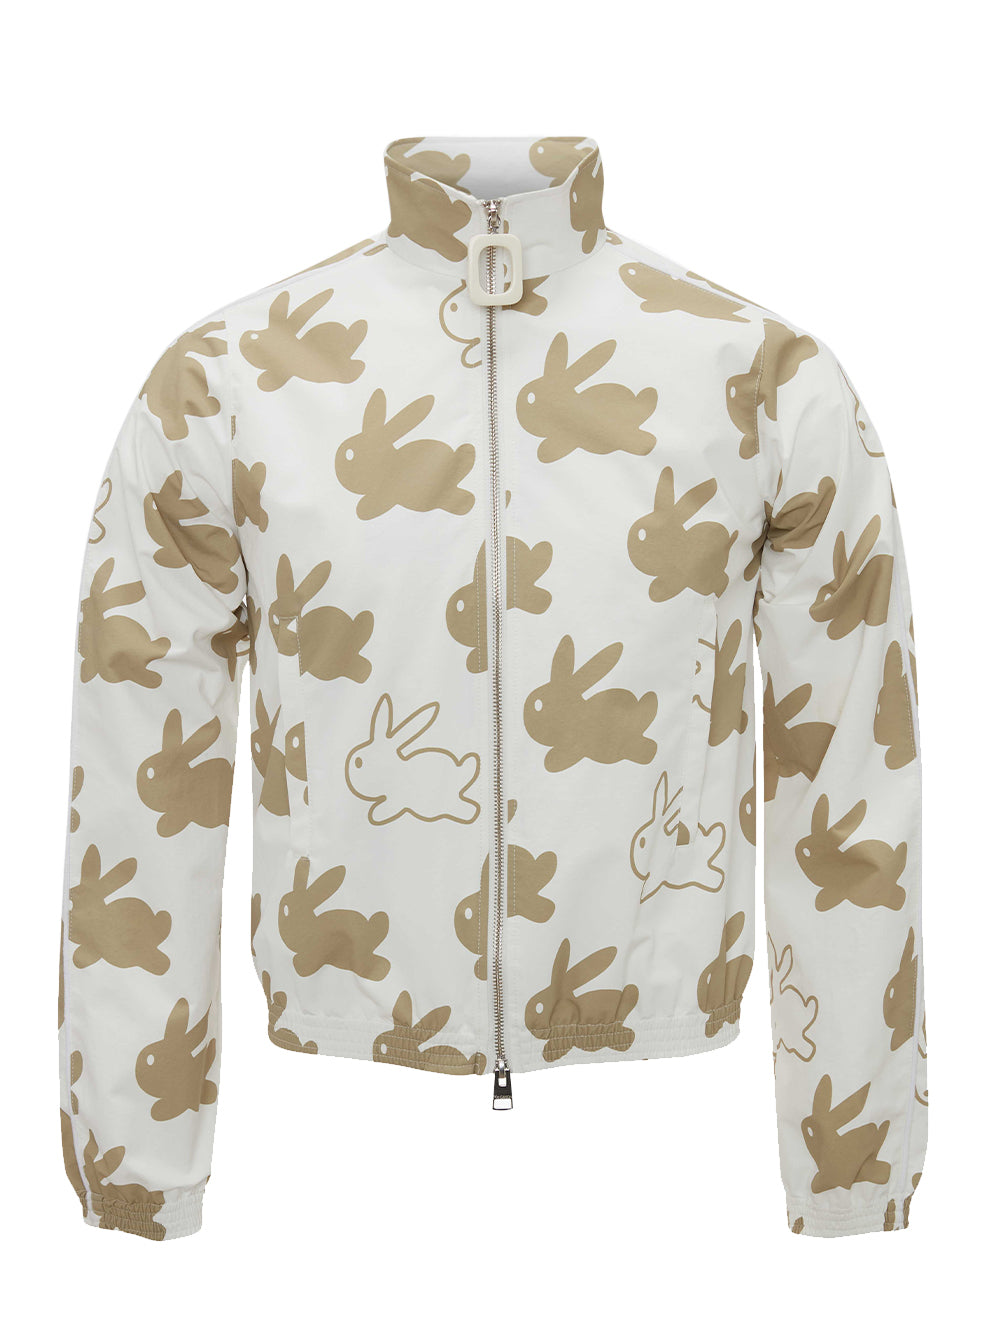 All Over Bunny Technical Jacket (White/Ivory)